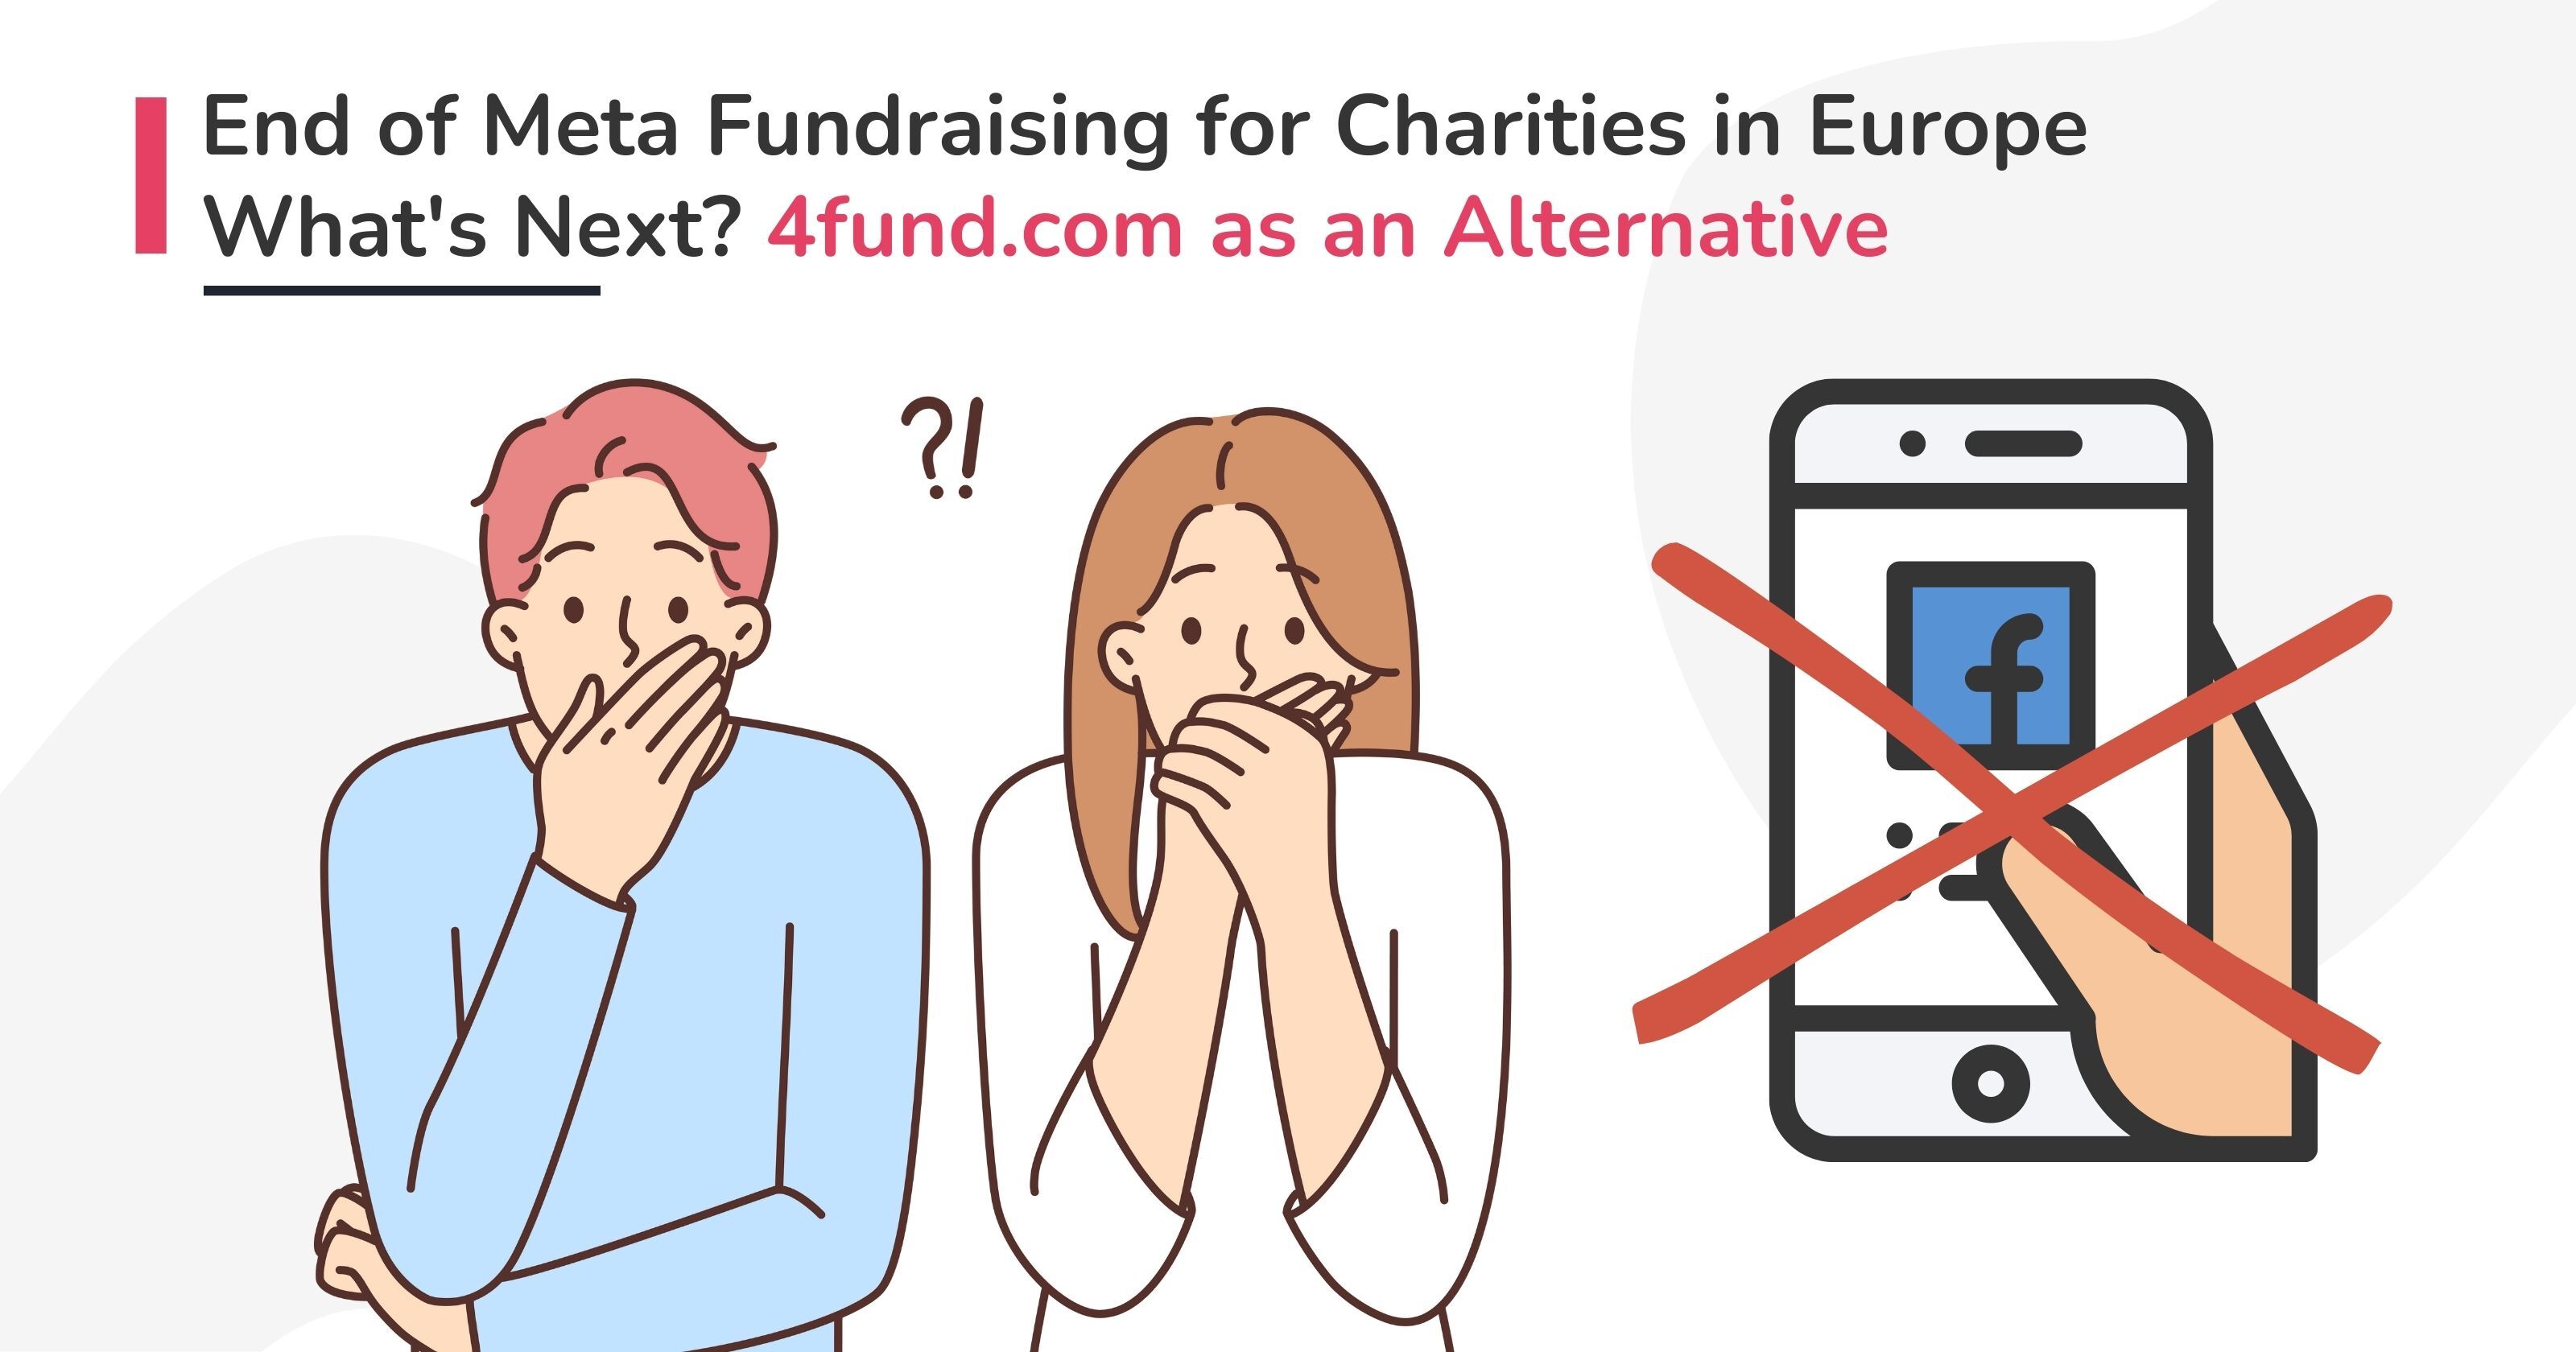 The End of Charity Facebook Fundraising in Europe